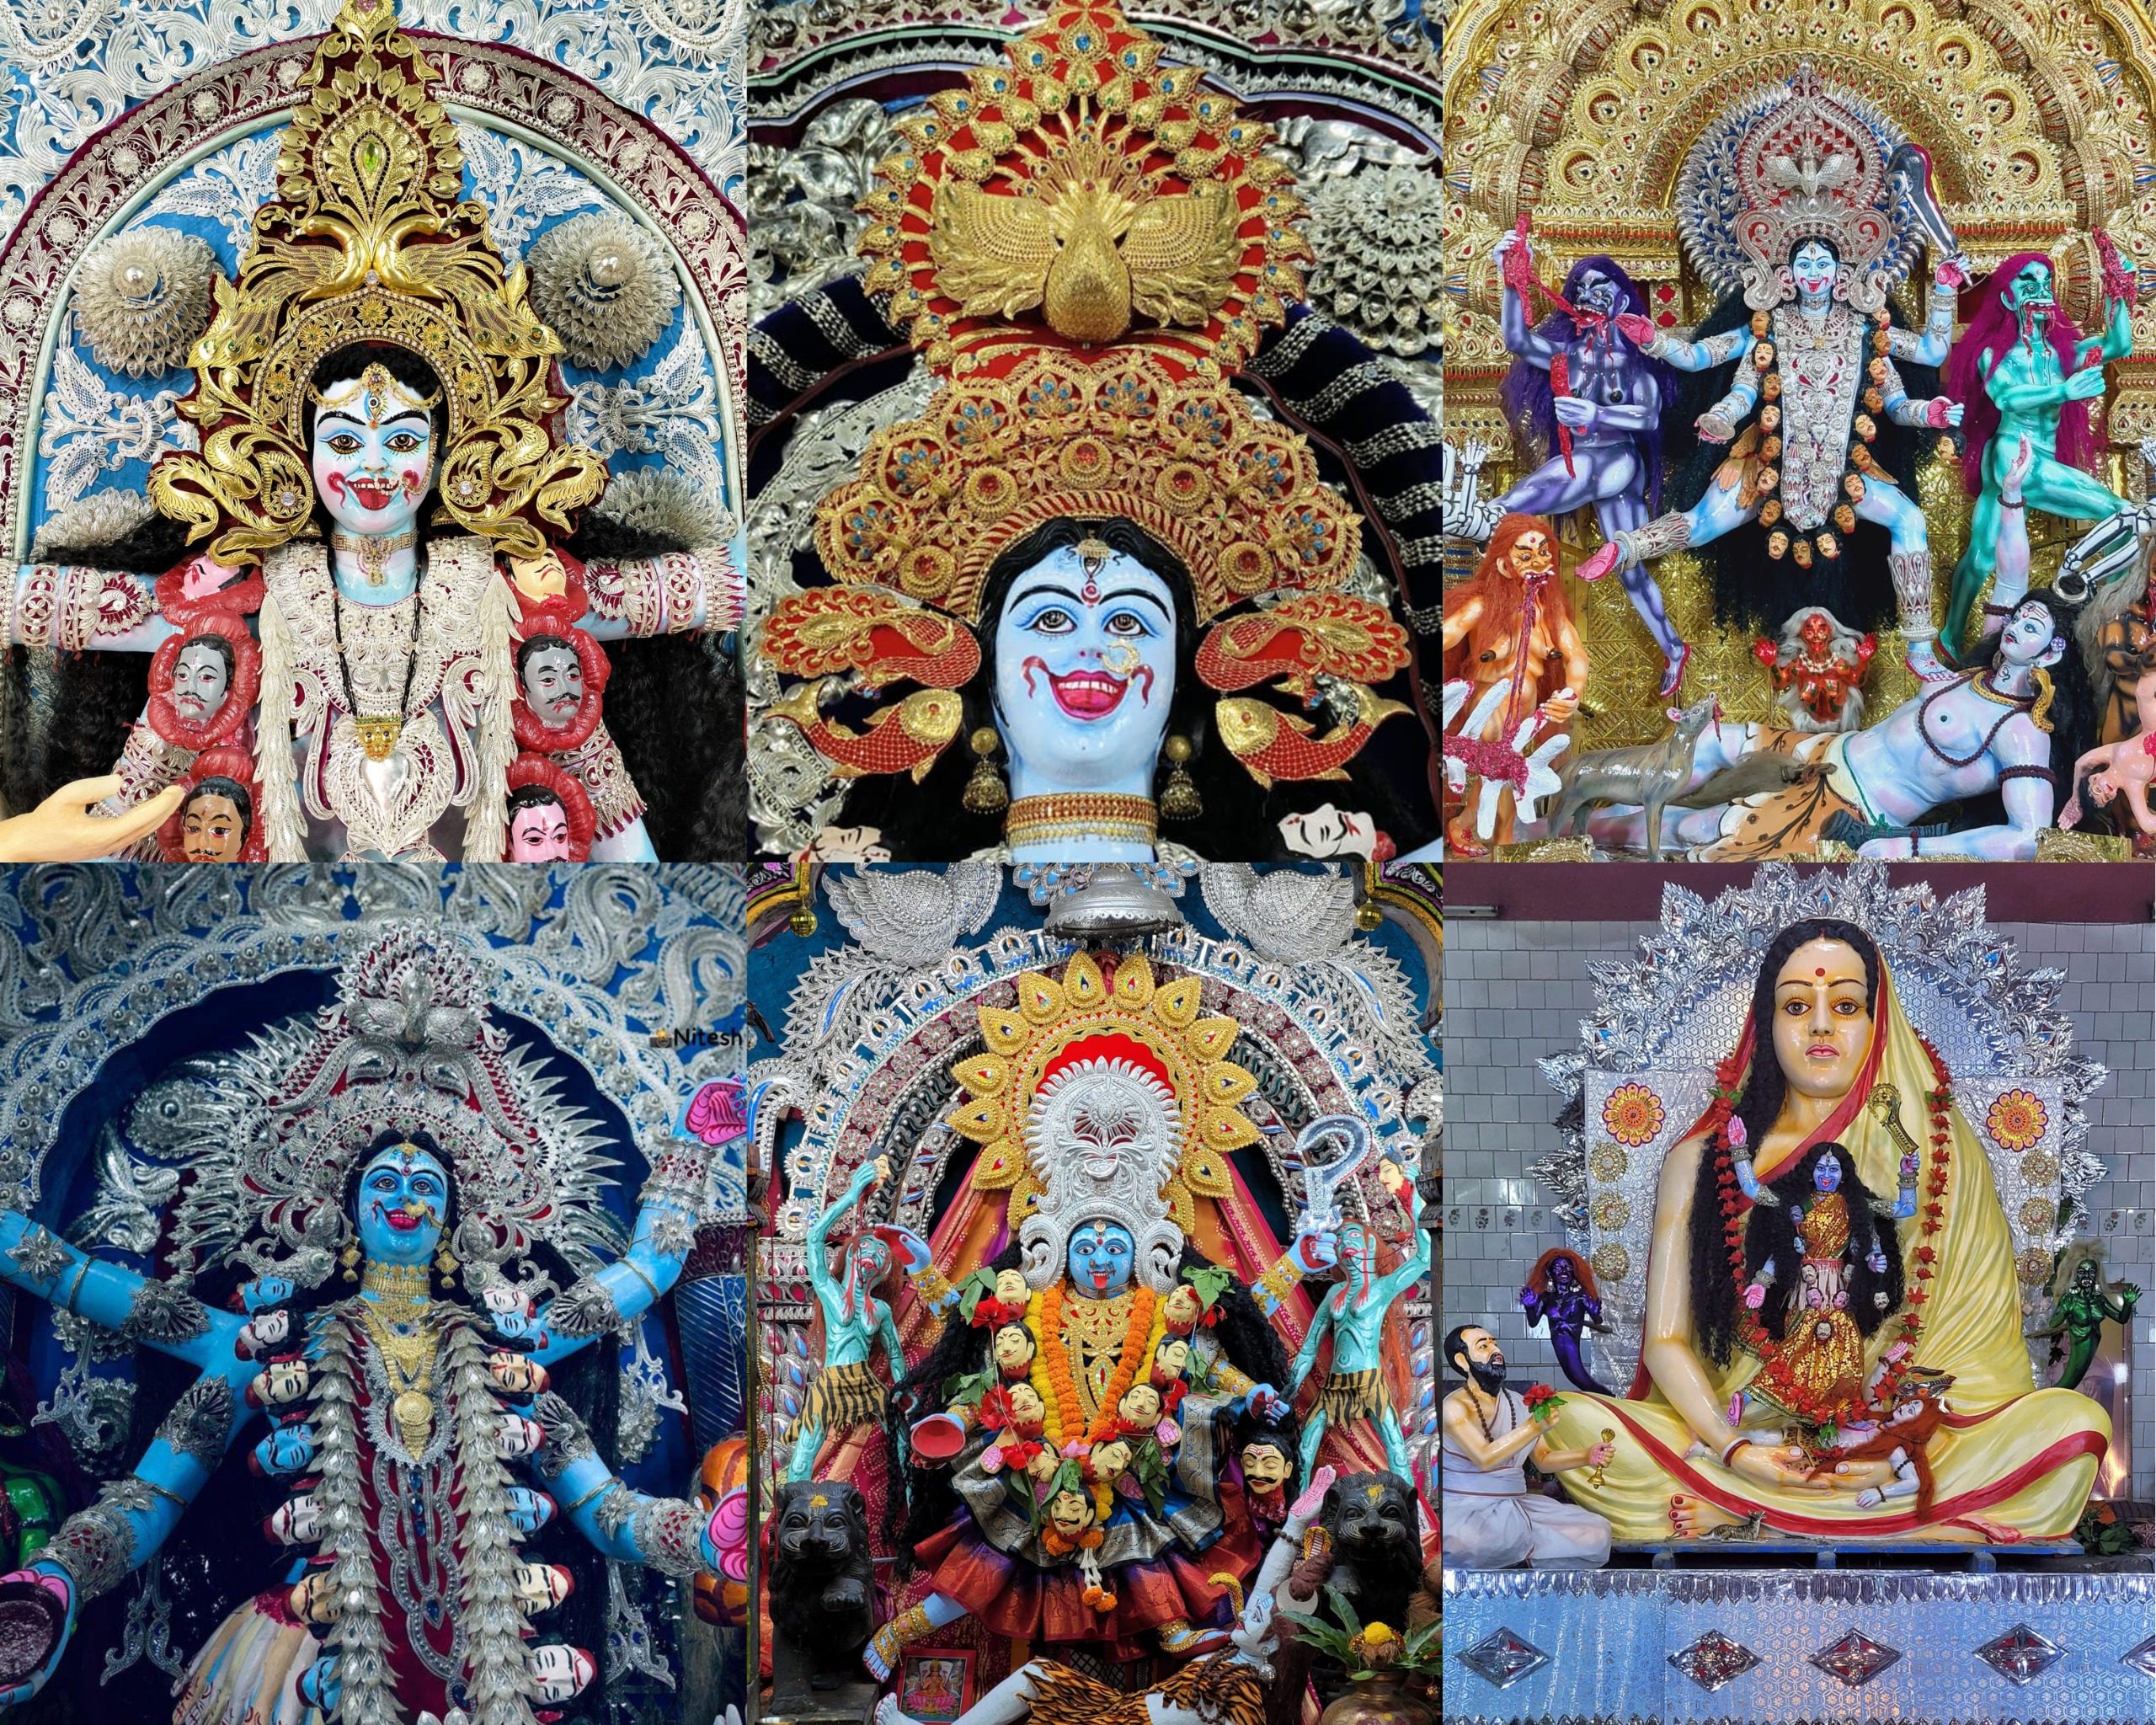 Cuttack city shines with 75 Kali puja pandals this year